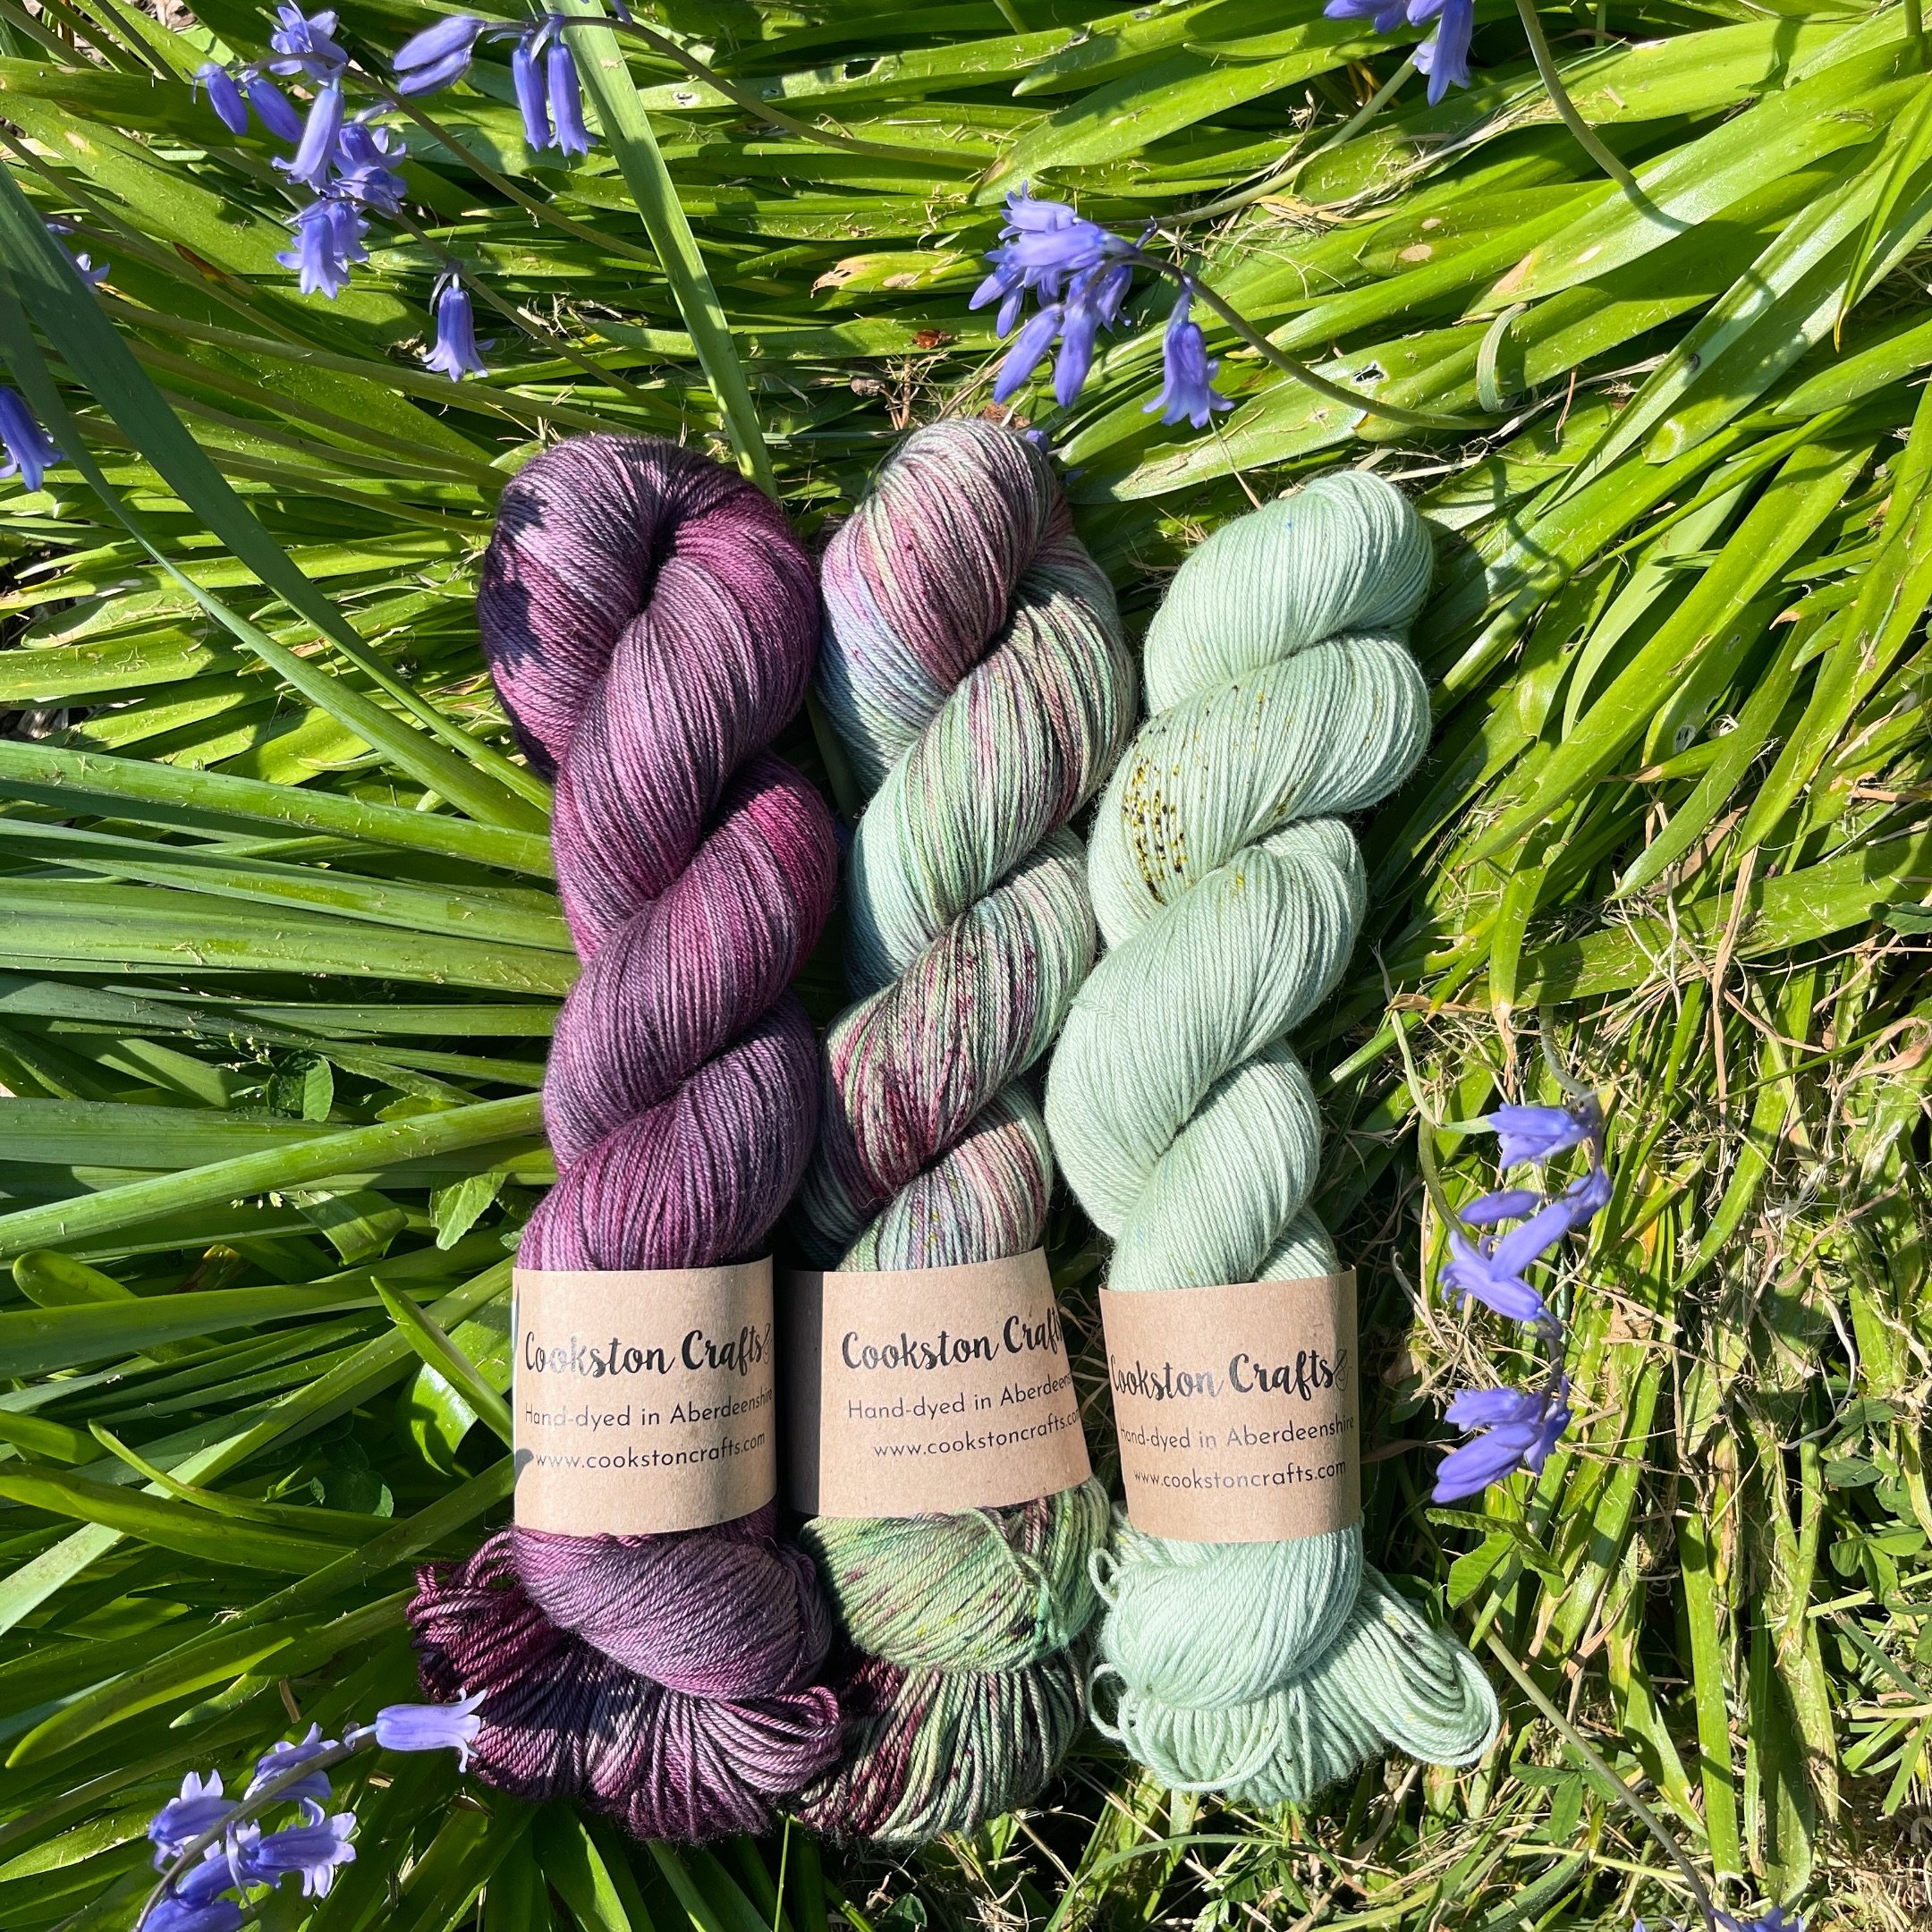 Aubergine, Thistle and Eucalyptus looking gorgeous in the sunshine! These would make a gorgeous 3 skein project and they are available to ship out now. 

#handdyedyarn #cookstoncrafts #yarndyer